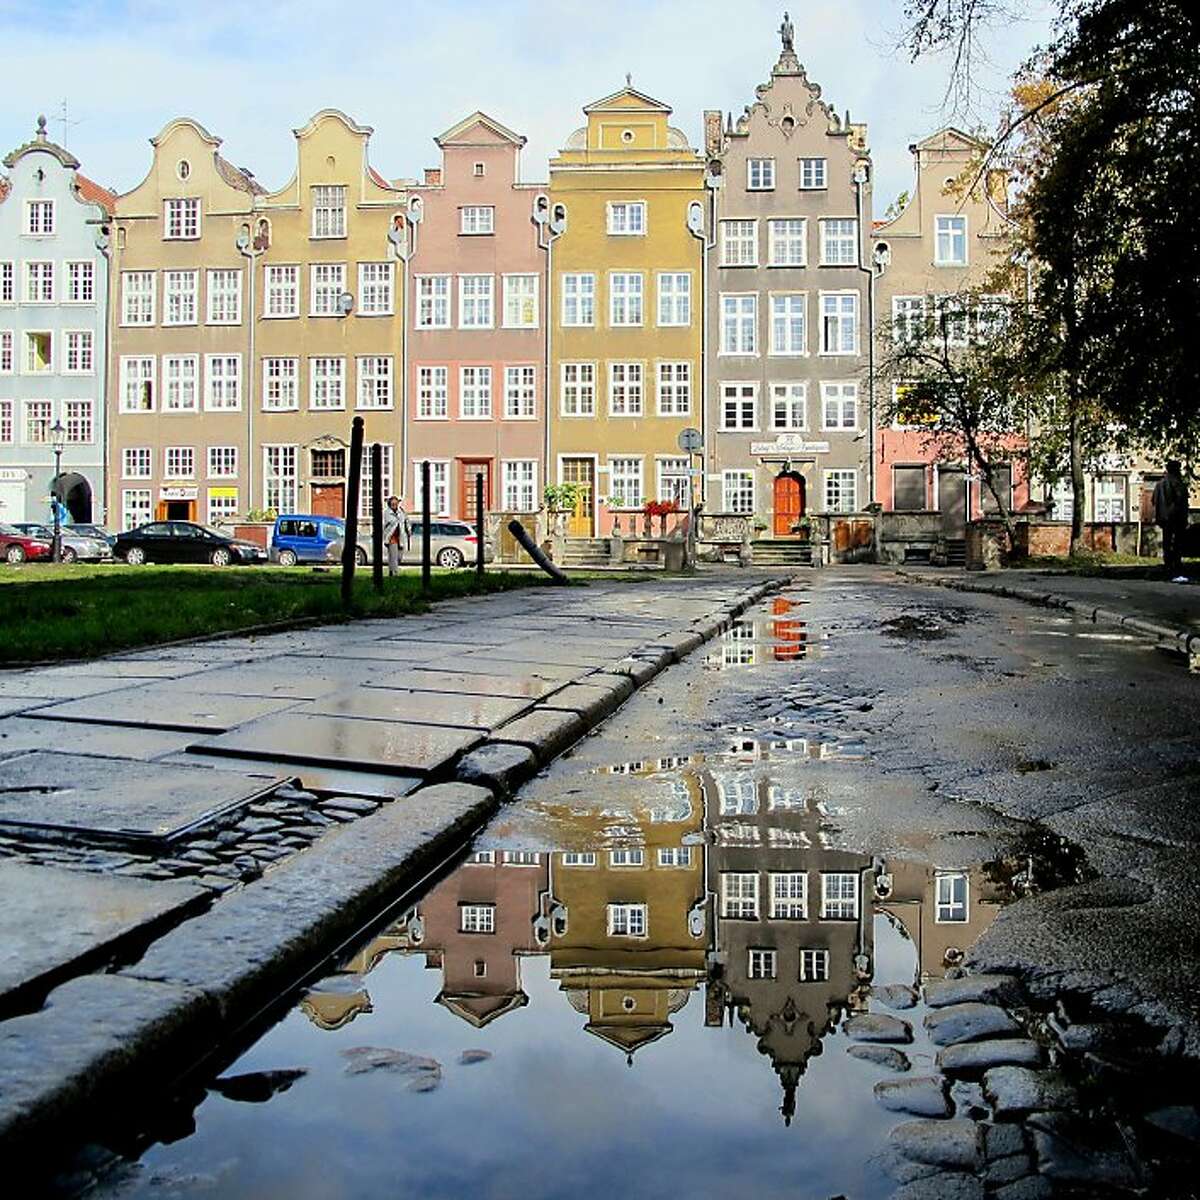 In the old town centre of Gdansk, Poland, a typical row of pastel-coloured old houses, one sunny morning, after a rainy night.